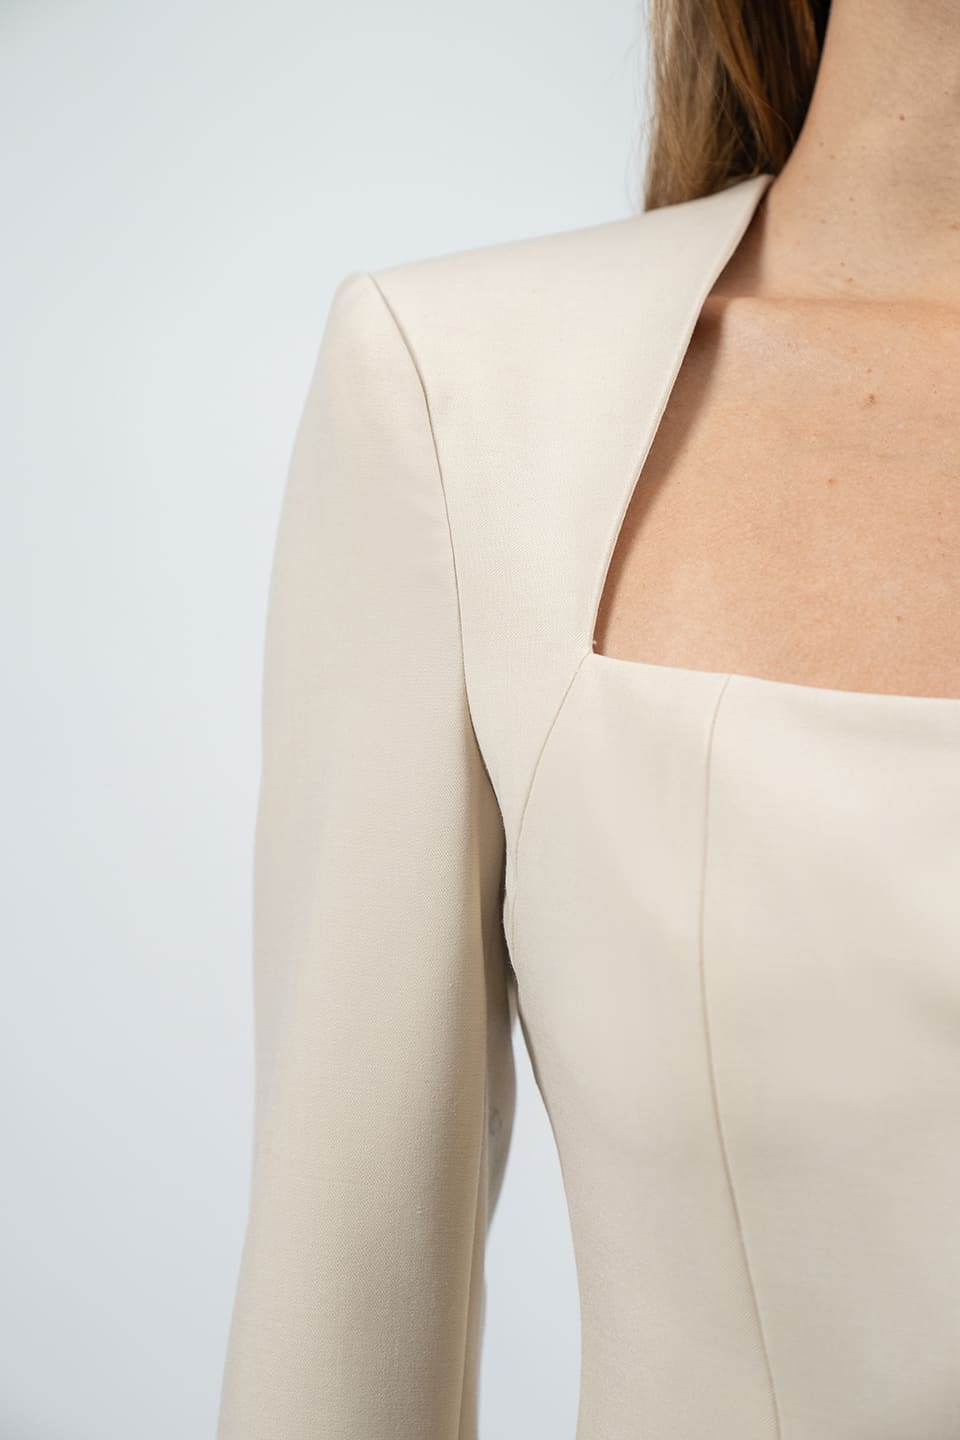 Thumbnail for Product gallery 5, Beige Corset Jacket